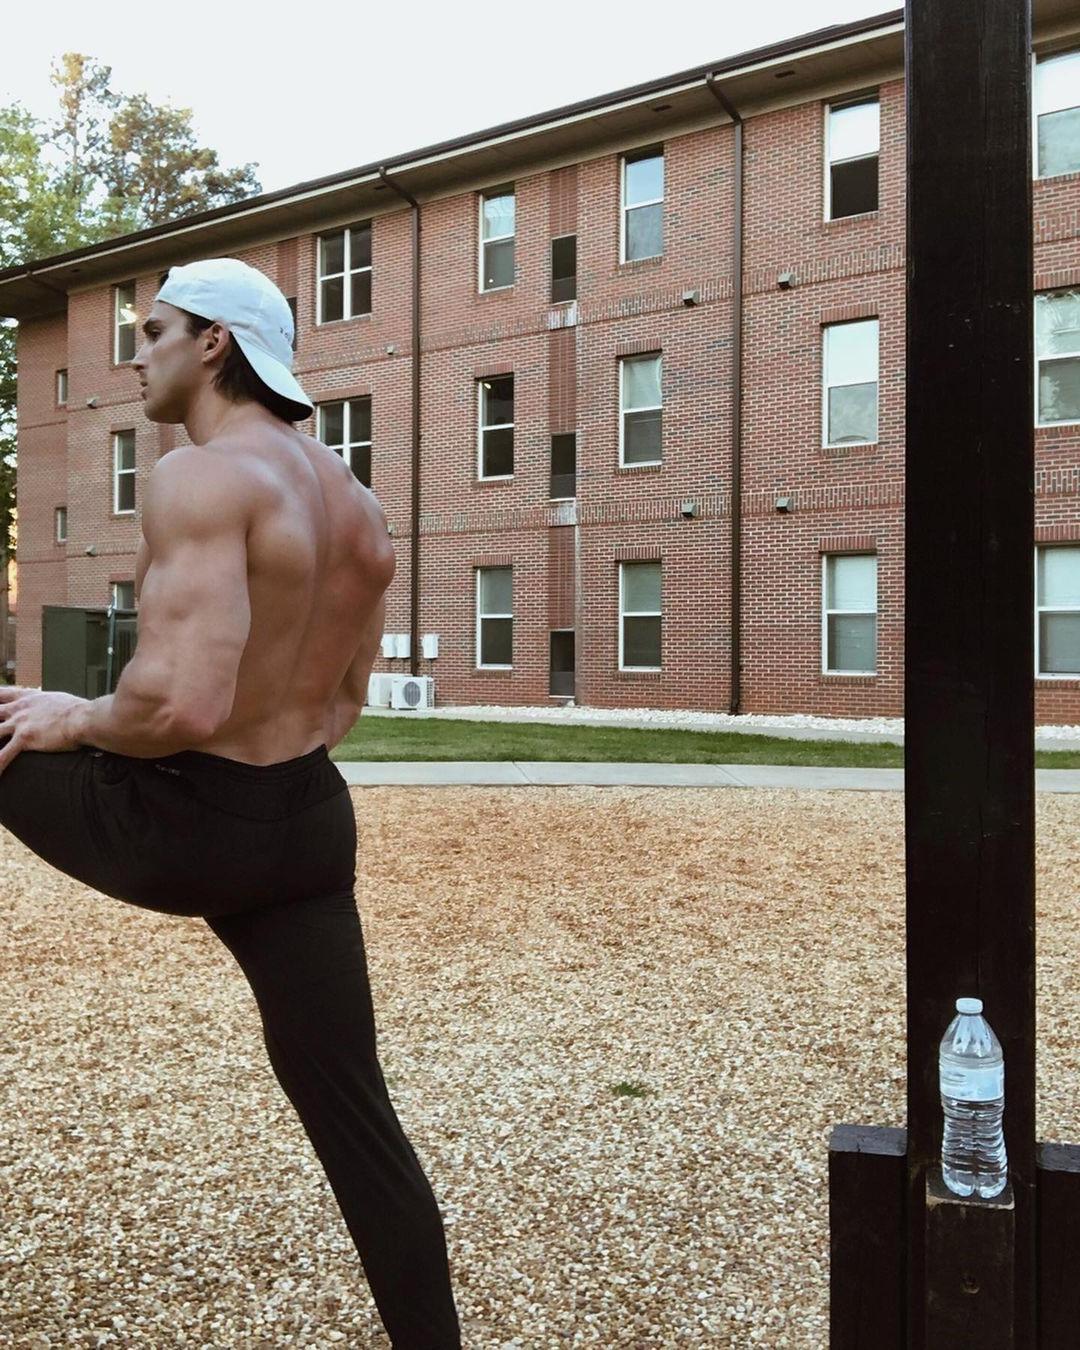 hot-fit-shirtless-guys-stretching-jeremy-hershberg-street-workout-strong-back-butt